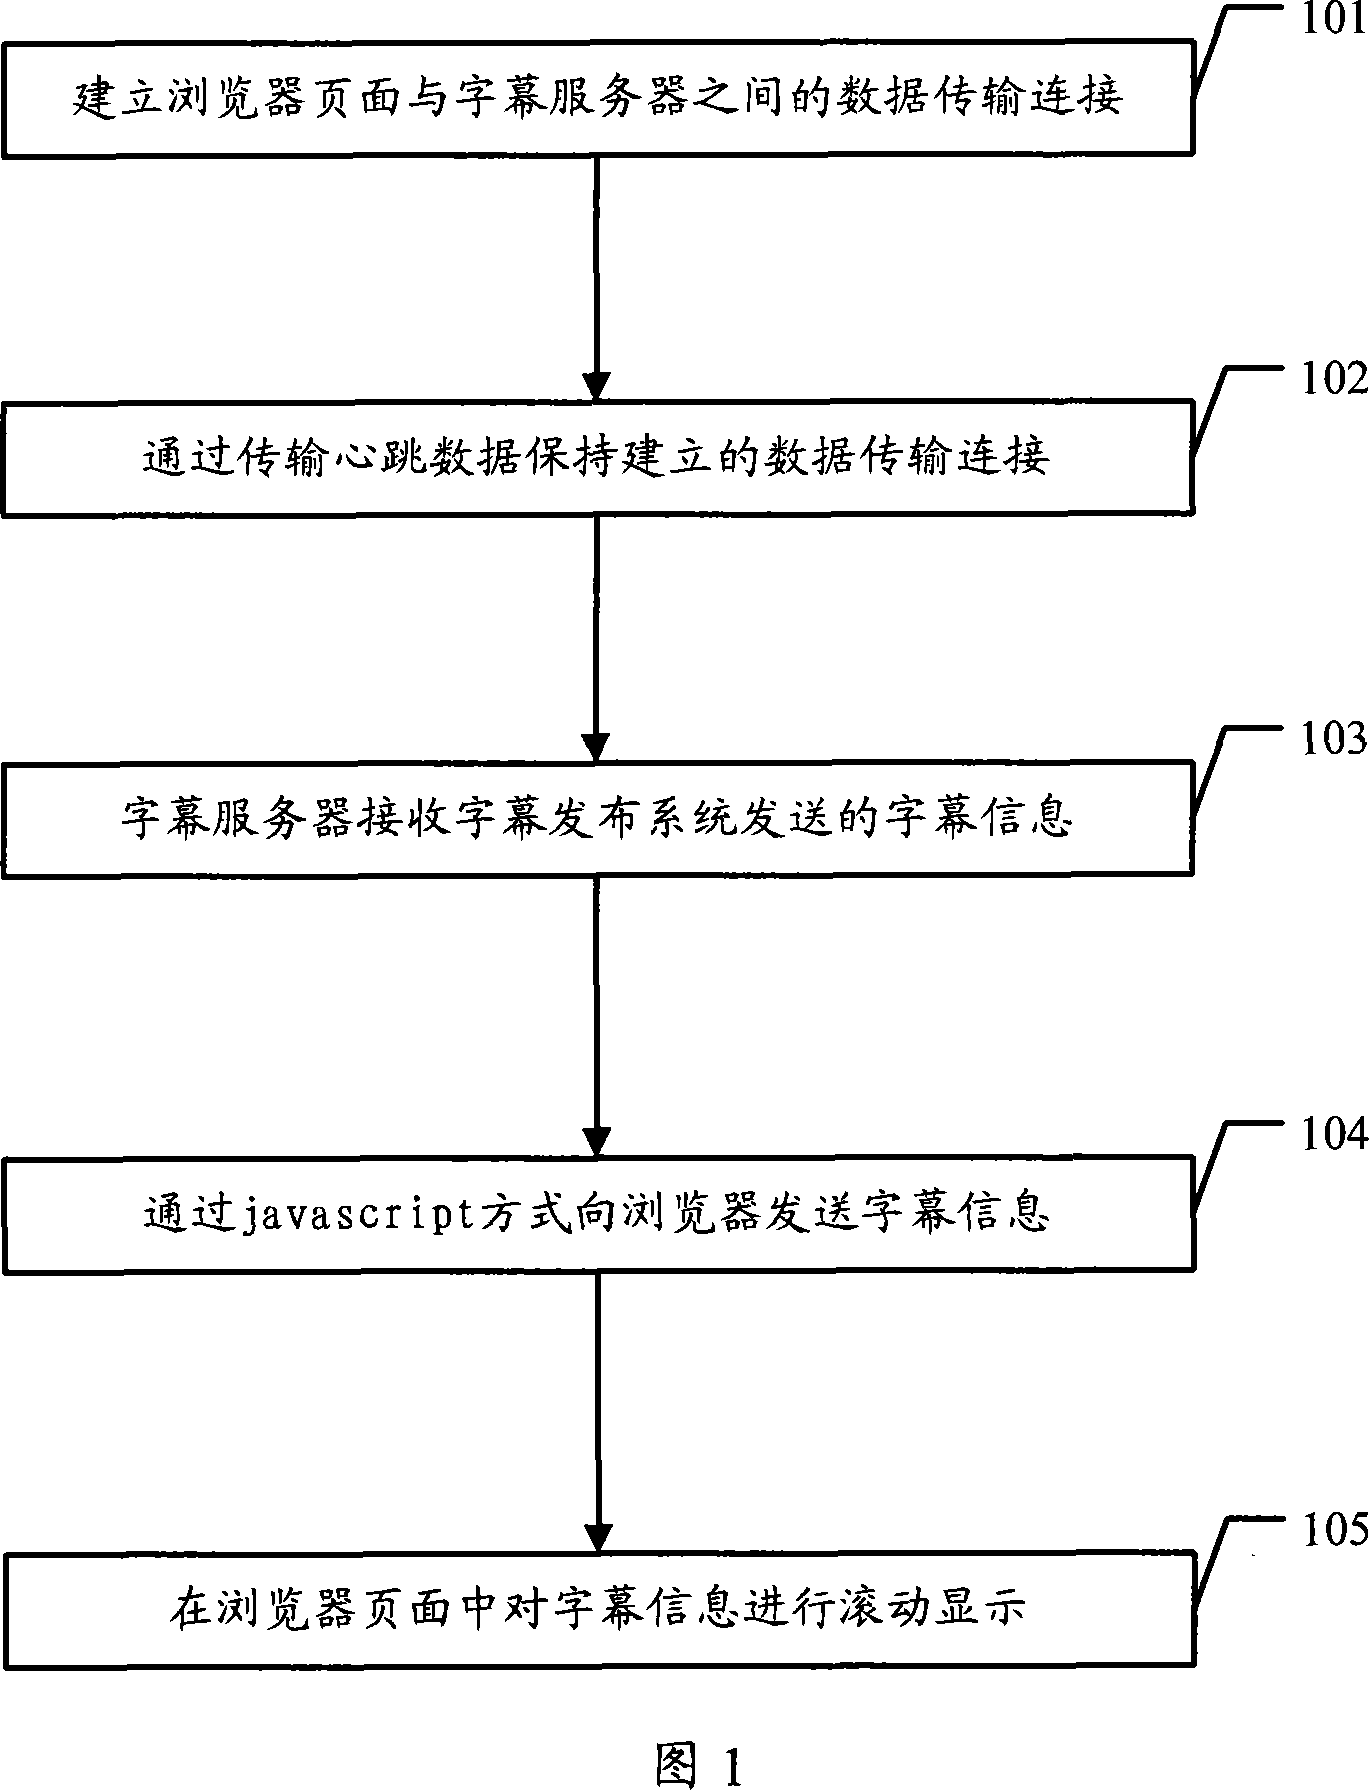 Subtitling display process and communication system and related equipment